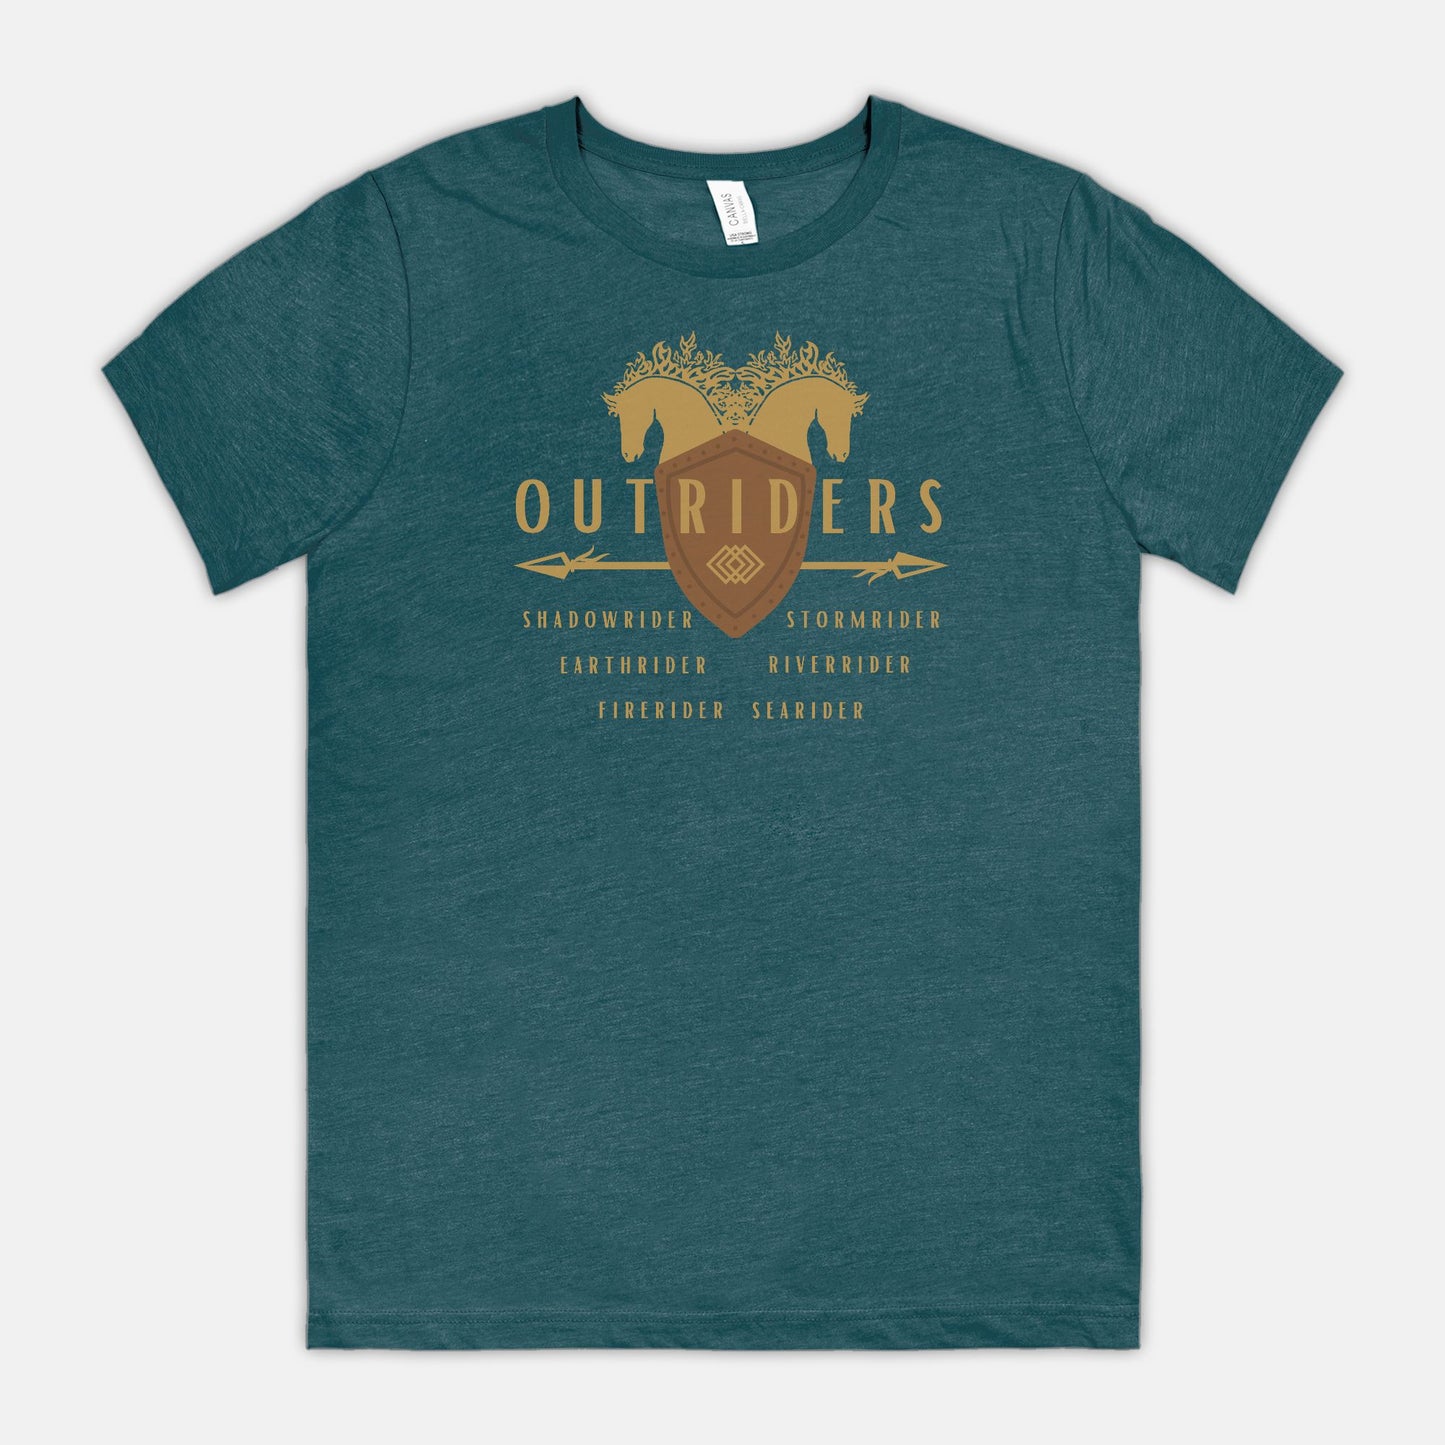 Outriders T-Shirt